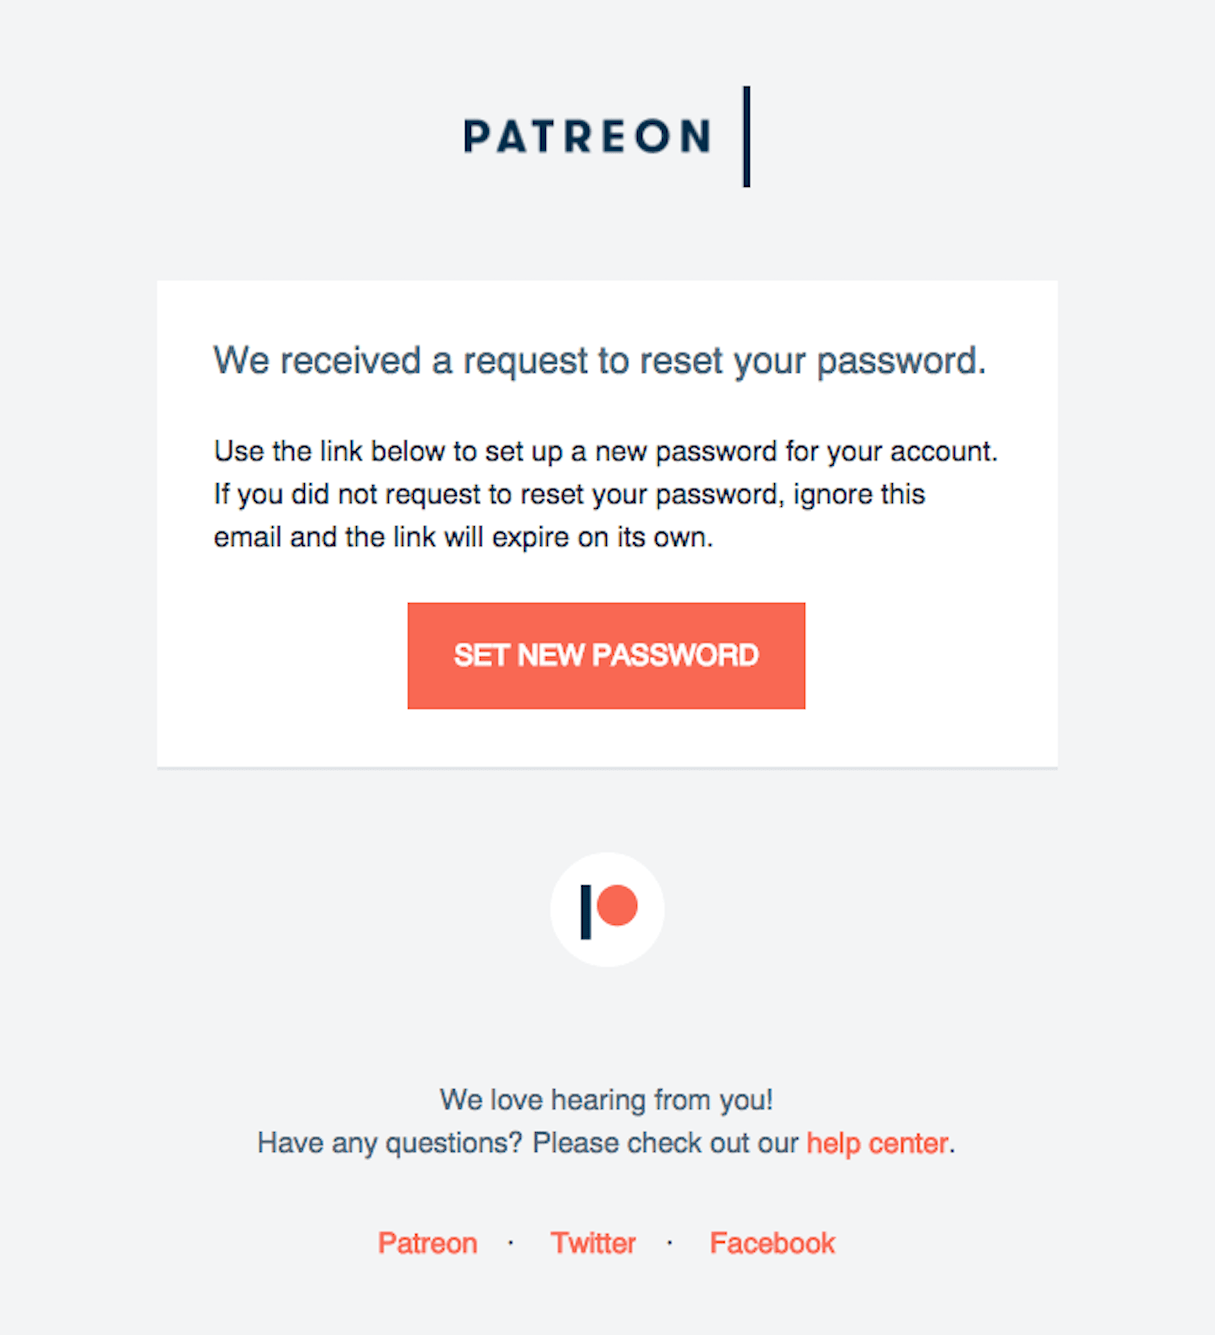 transactional emails: patreon